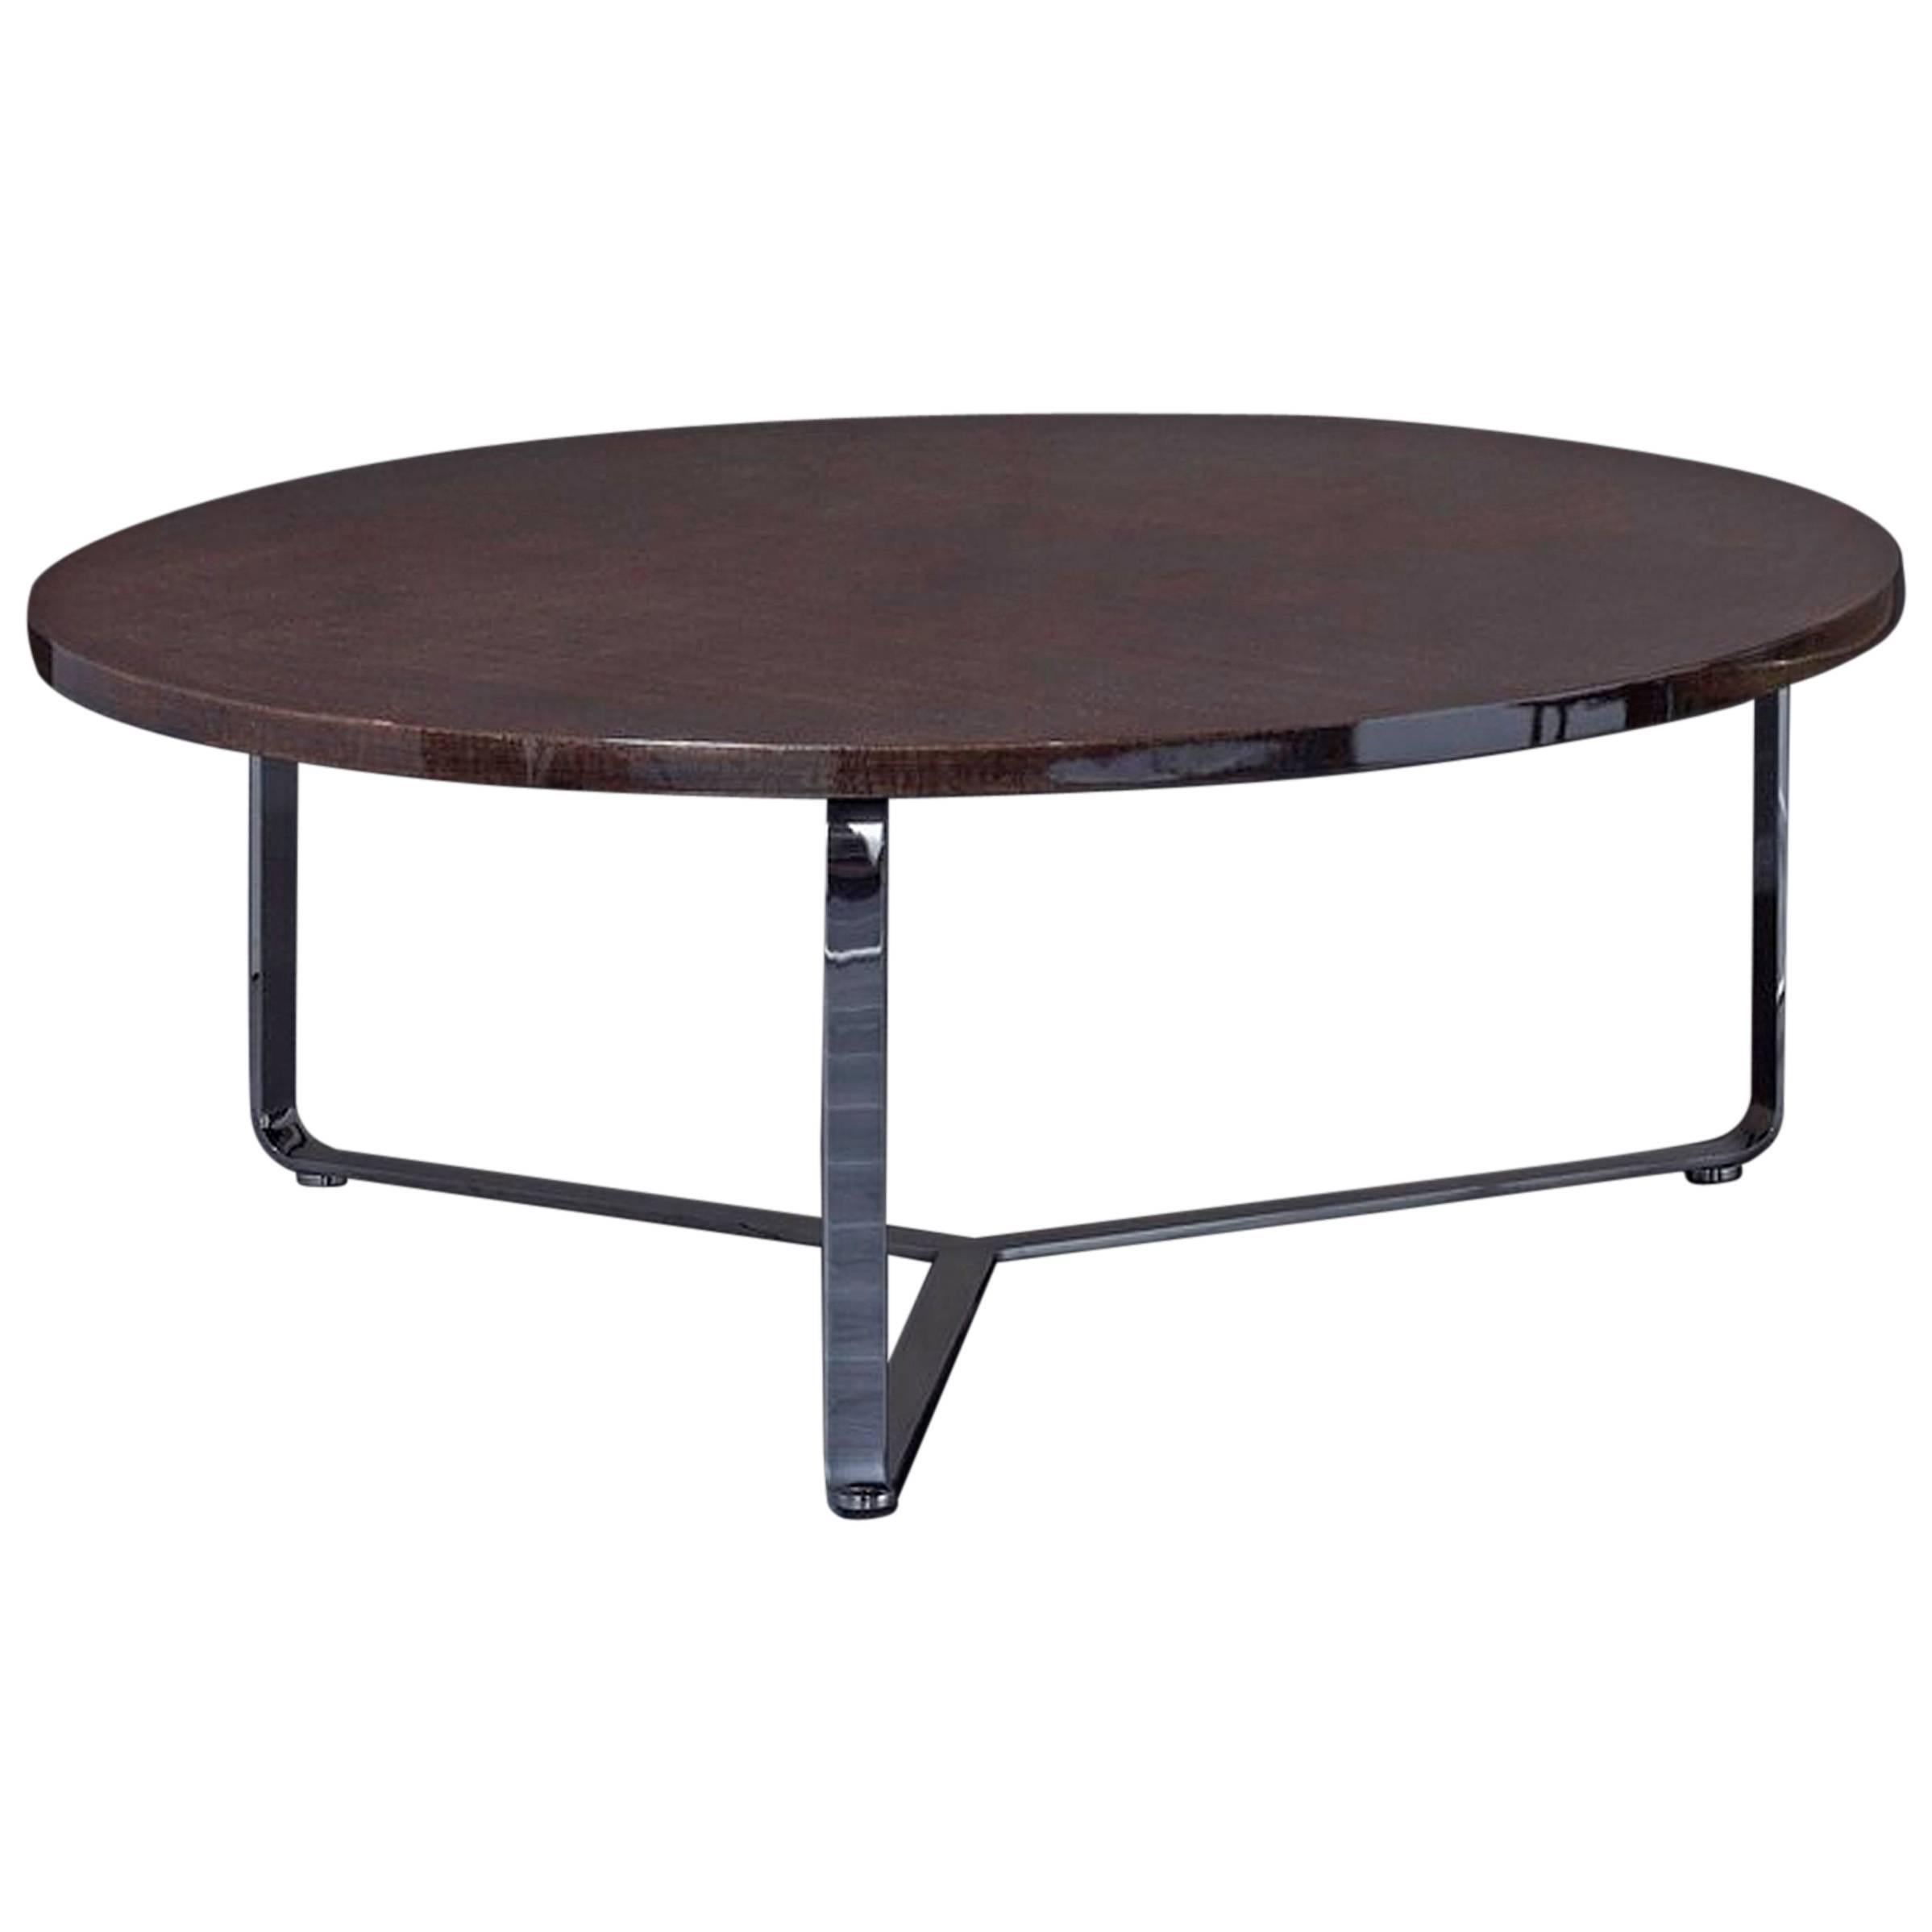 Edge Coffee Table Polished Stainless Steel Structure and Leather Top For Sale